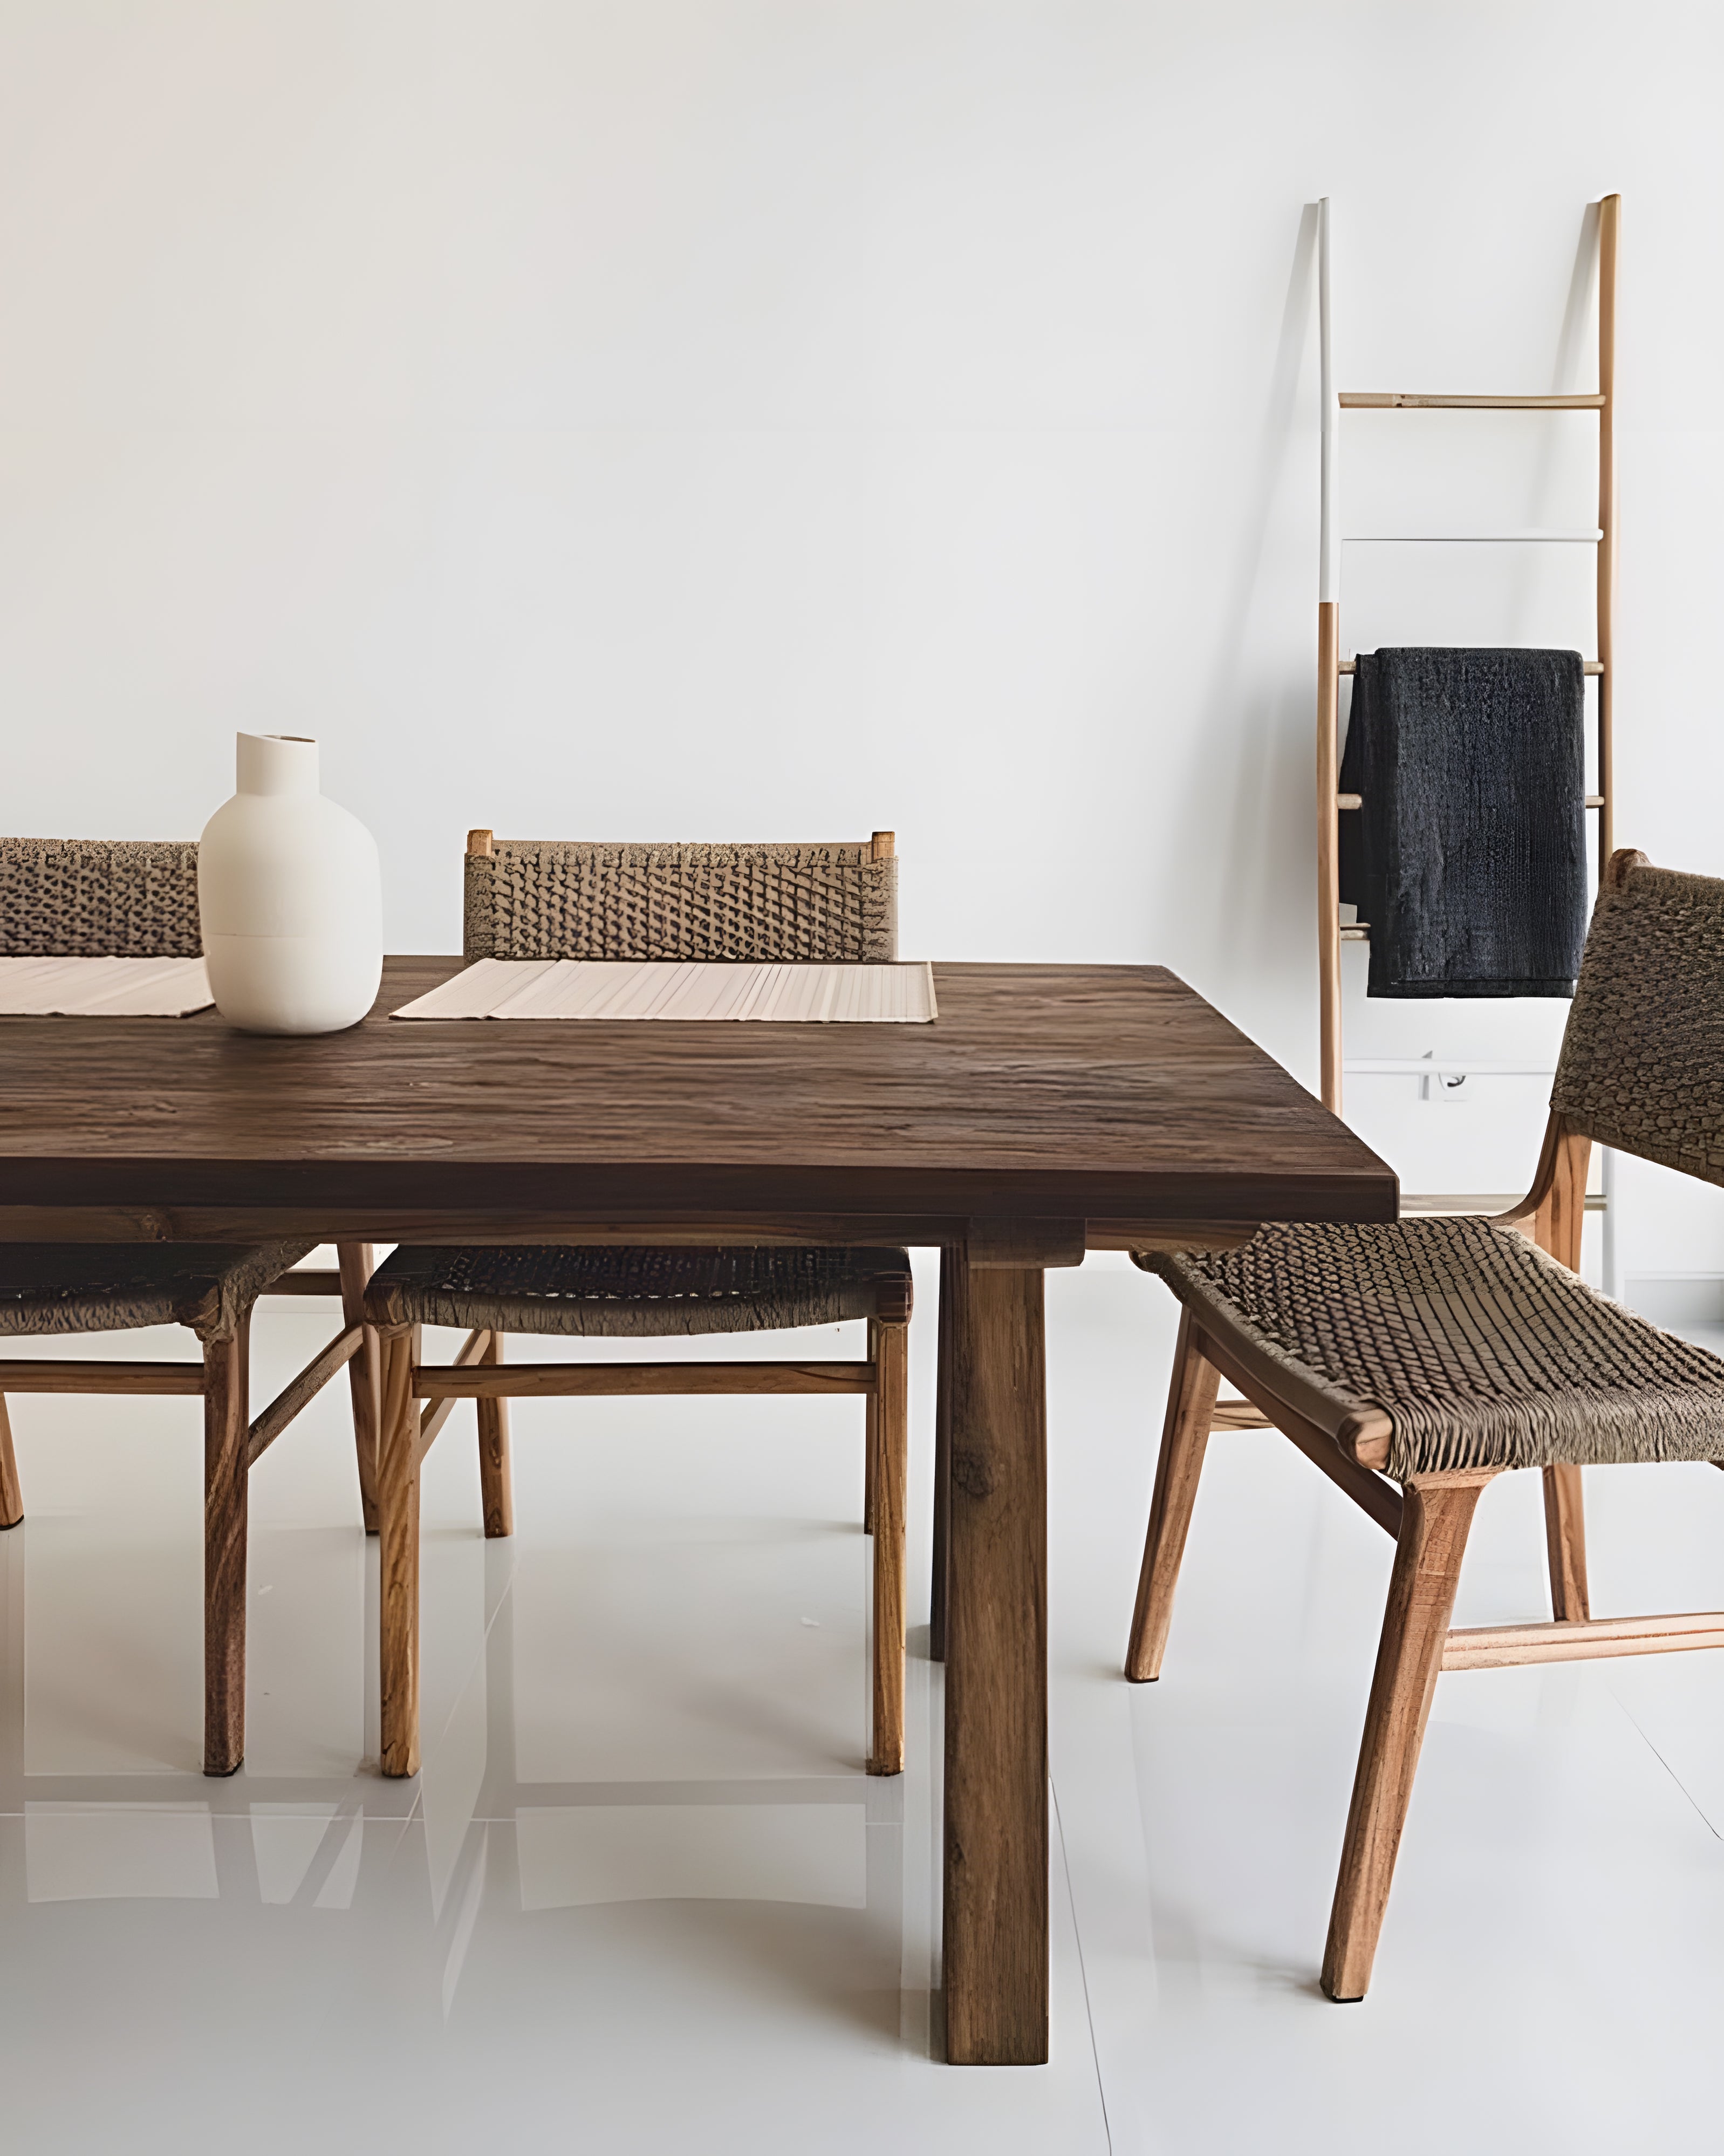 Asturia Mindi Wood & Rattan Weaved Back & Seat Dining Chair and Fontera Reclaimed Teakwood Dining Table in dining room setting by Mellowdays Furniture